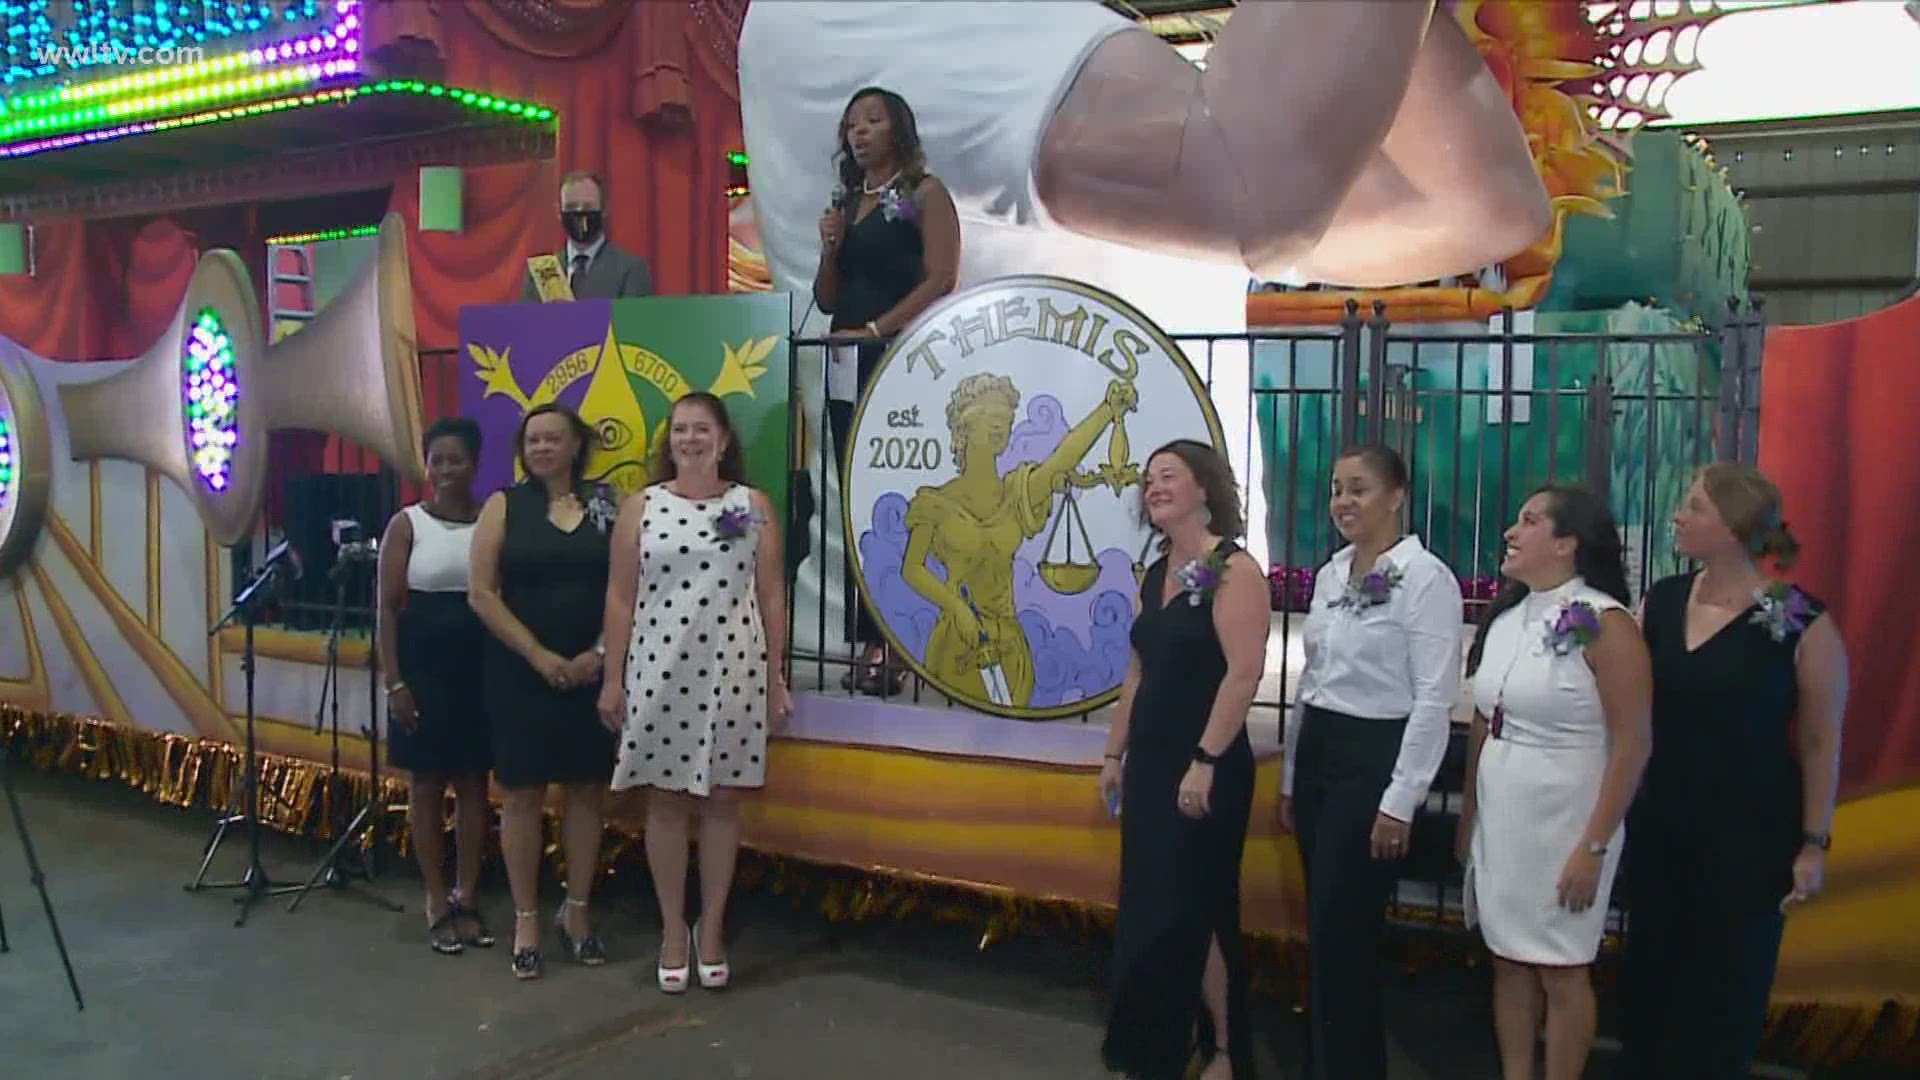 Former members of the Krewe of Nyx have formed a new all-female Carnival krewe, Themis, which will roll with the Krewe of Freret.